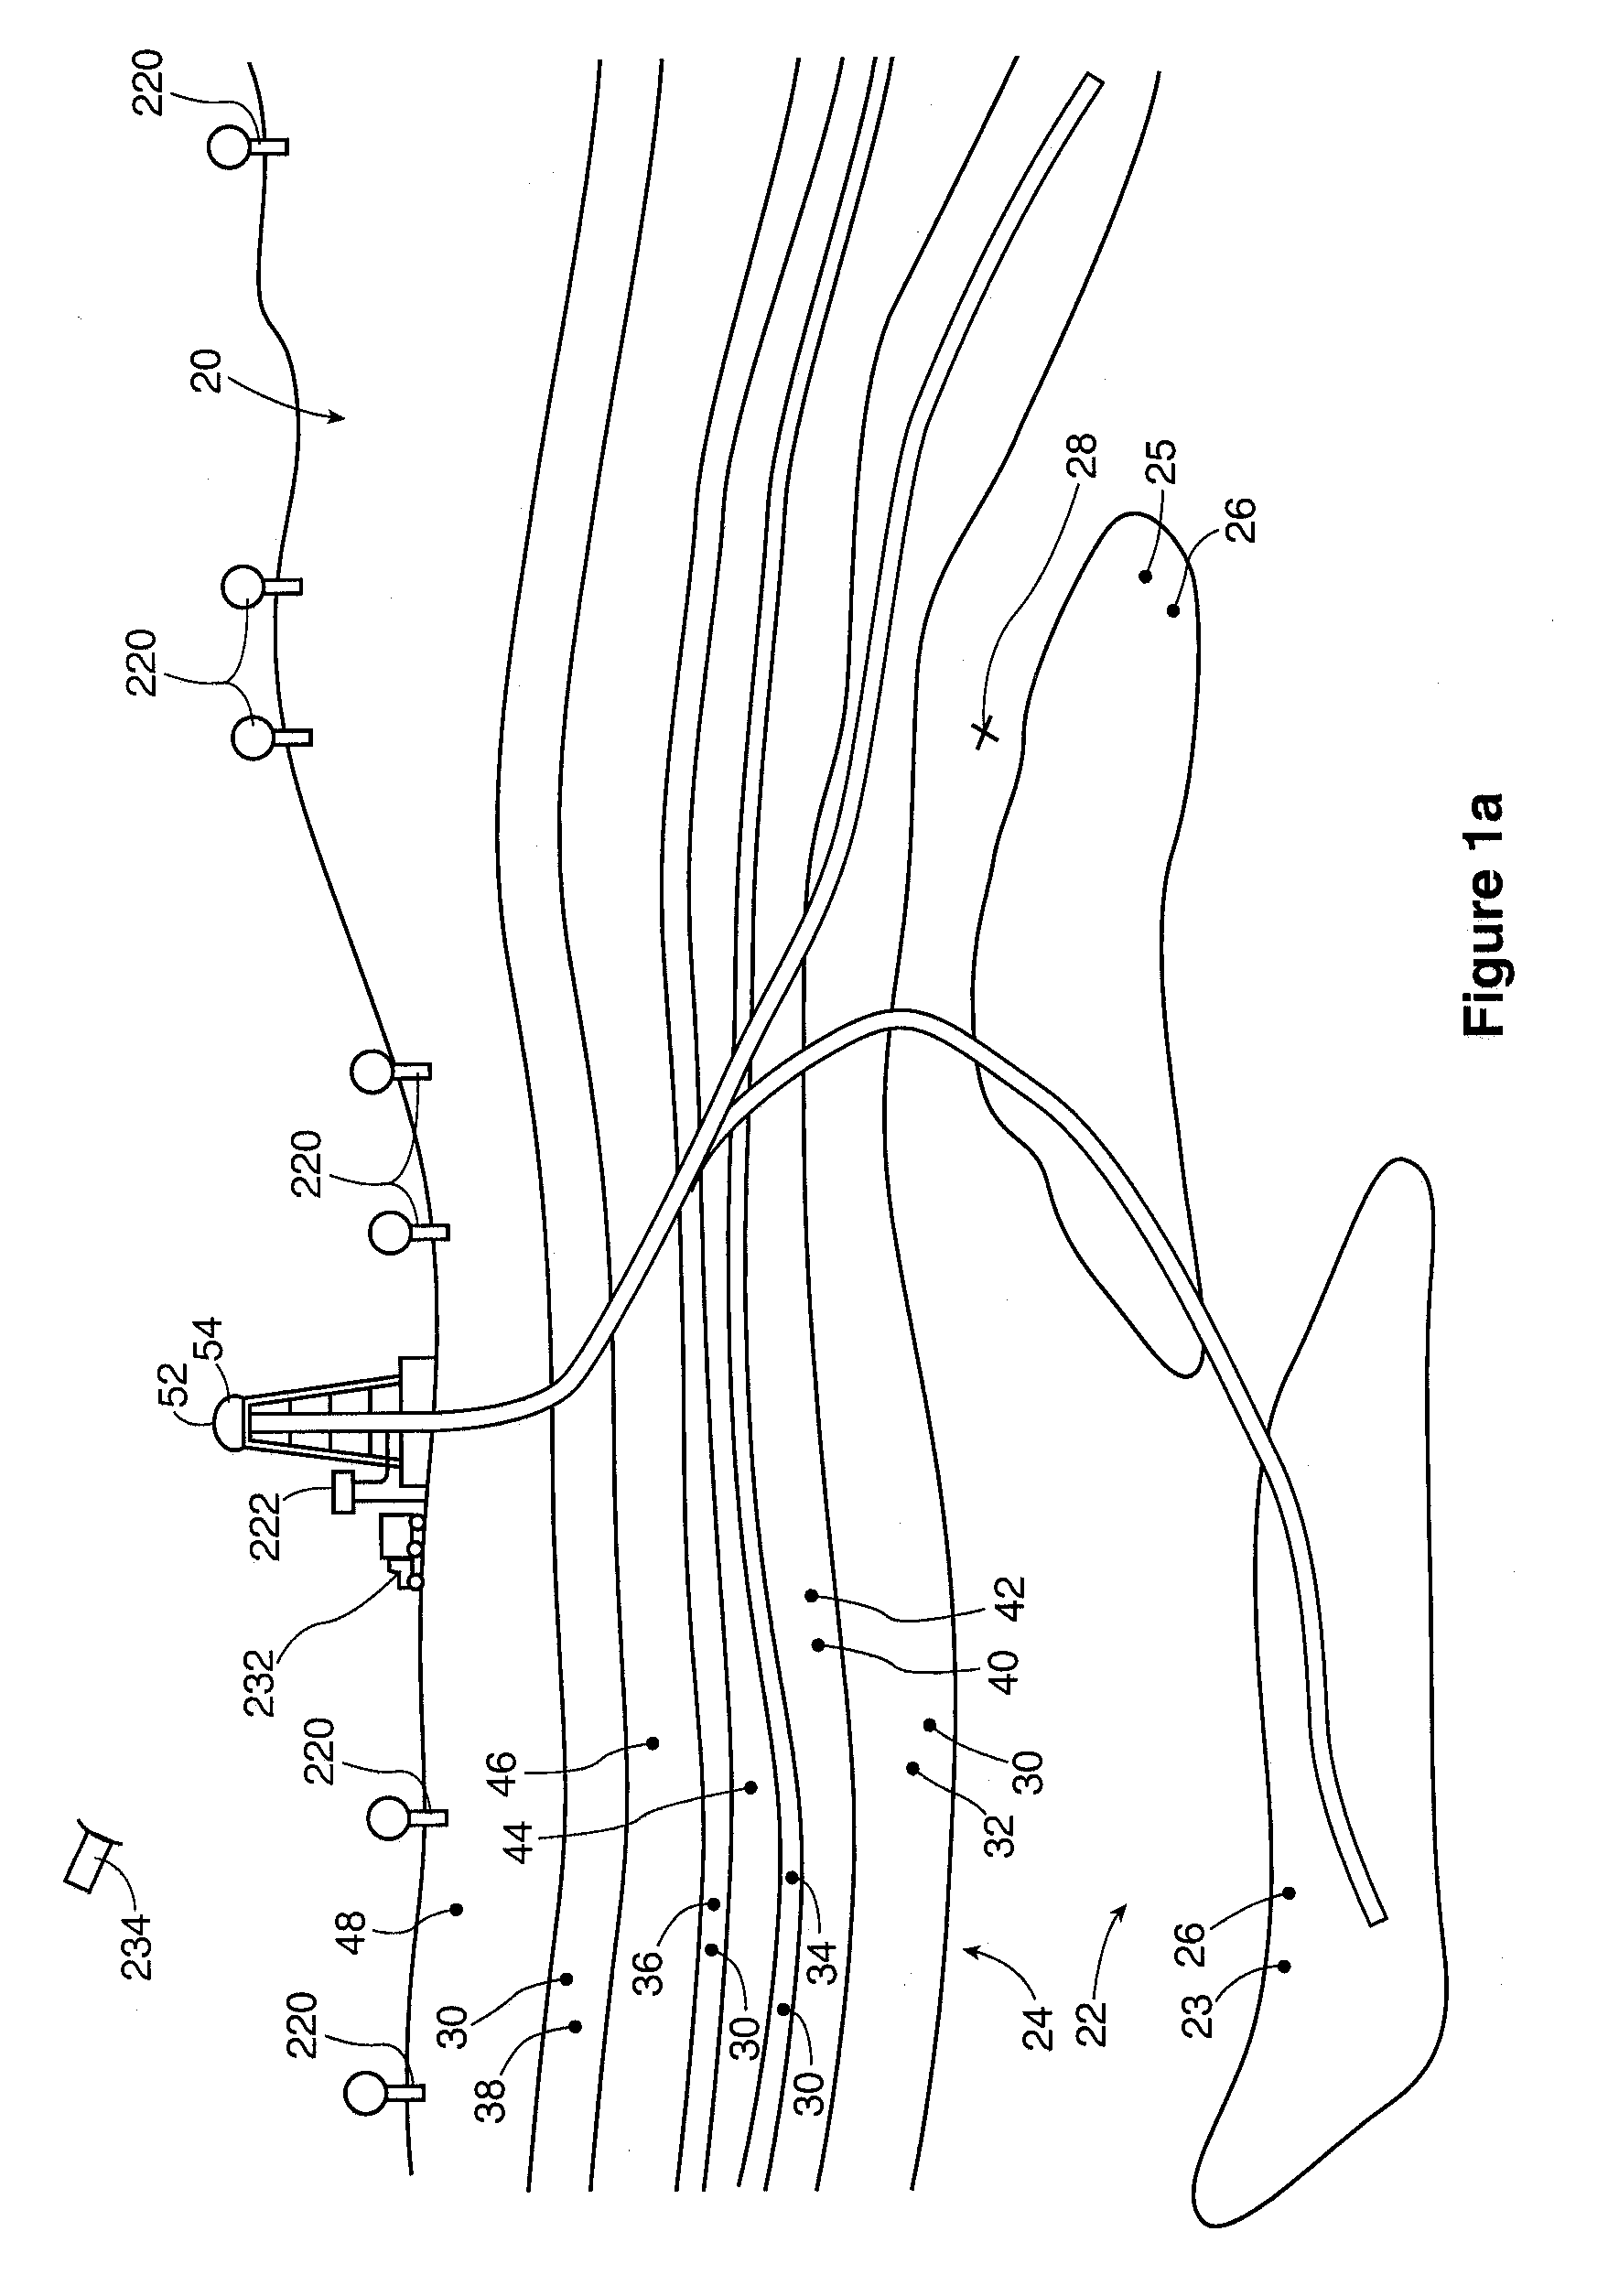 Drill bit tracking apparatus and method